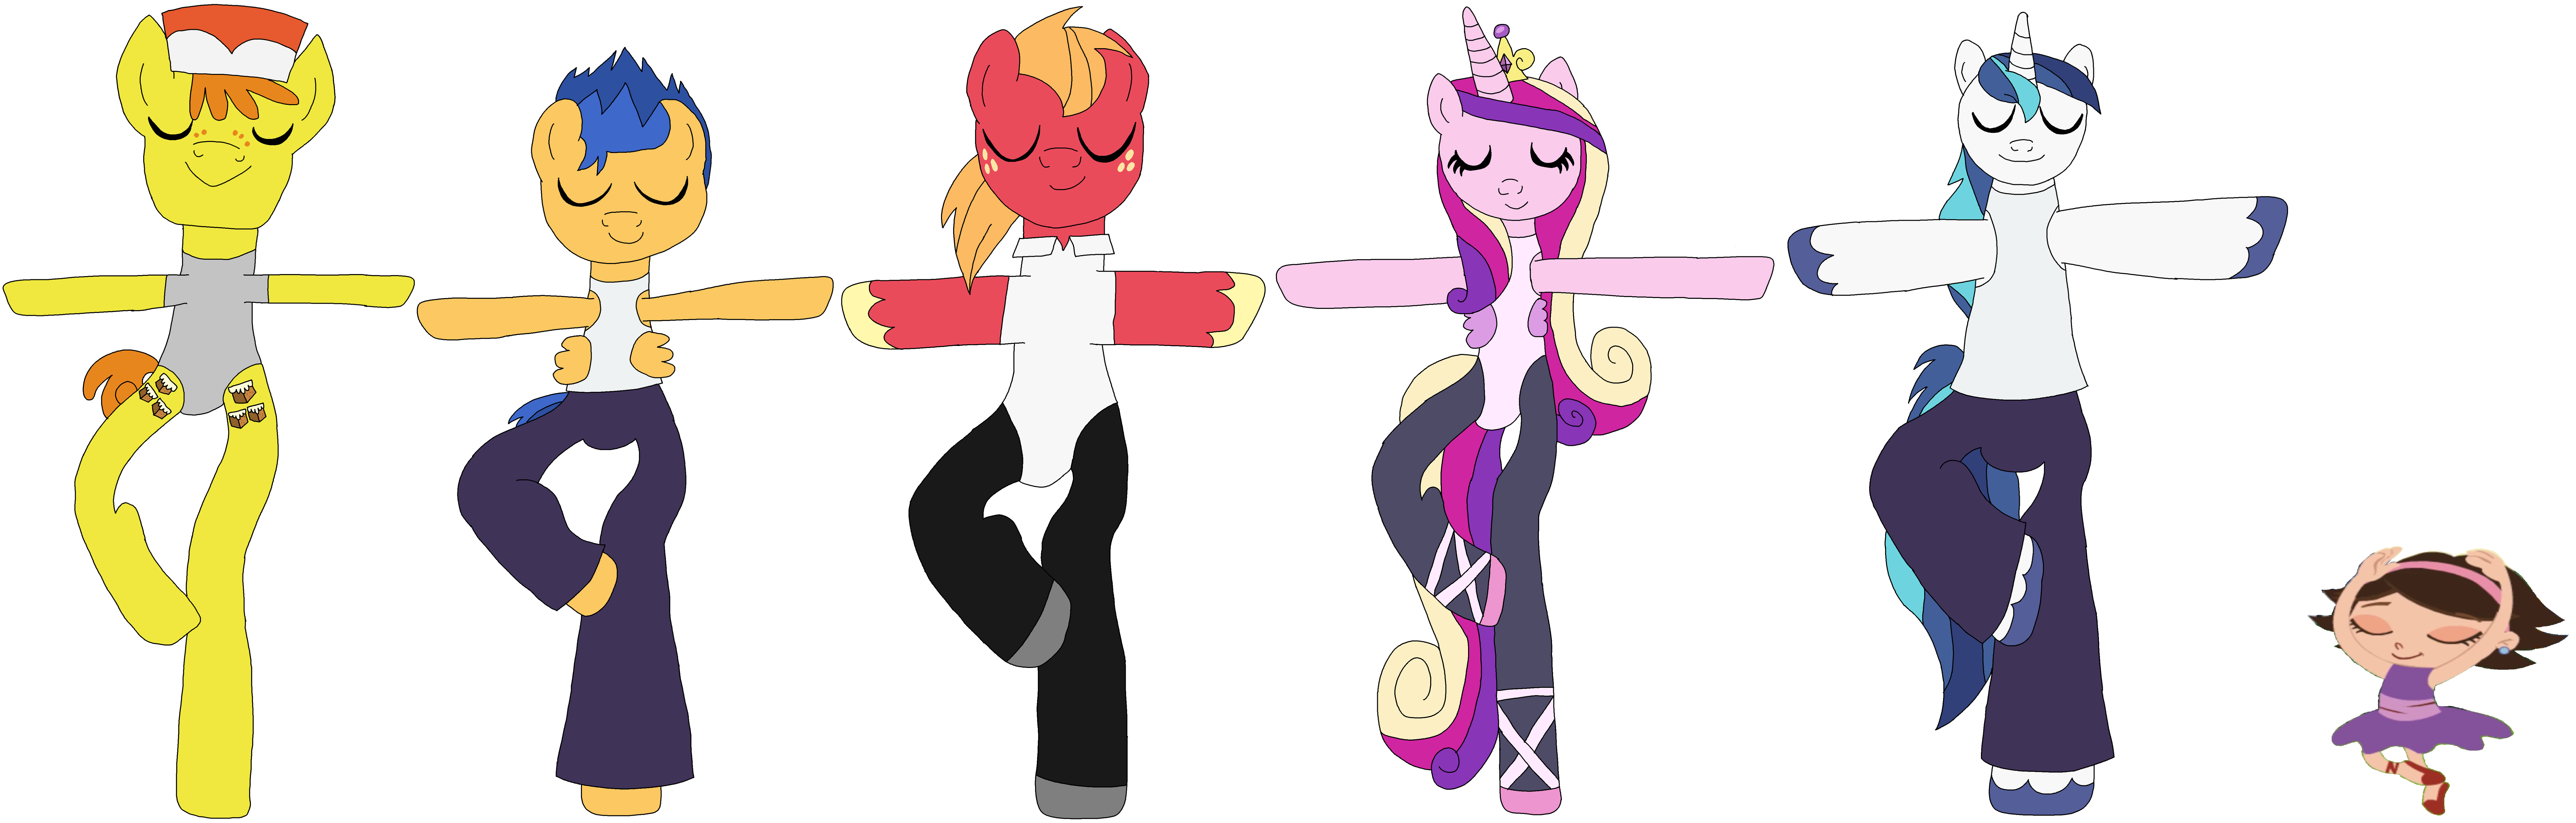 June And The Ballet Ponies Twirling By Hubfanlover678 On Deviantart